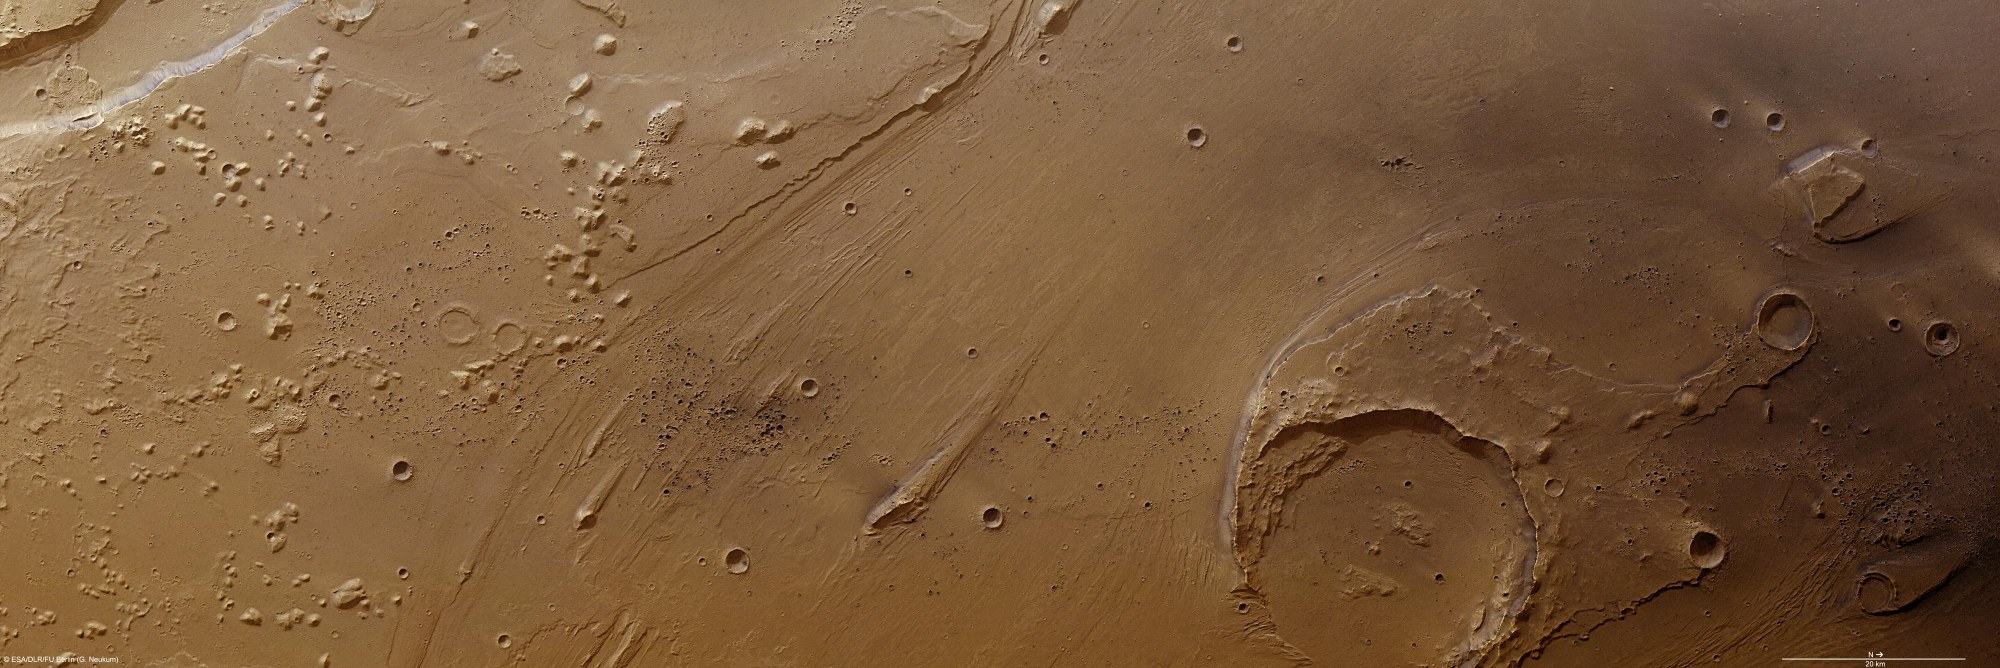 Colour plan view of the mouth of the Ares Vallis outflow chann